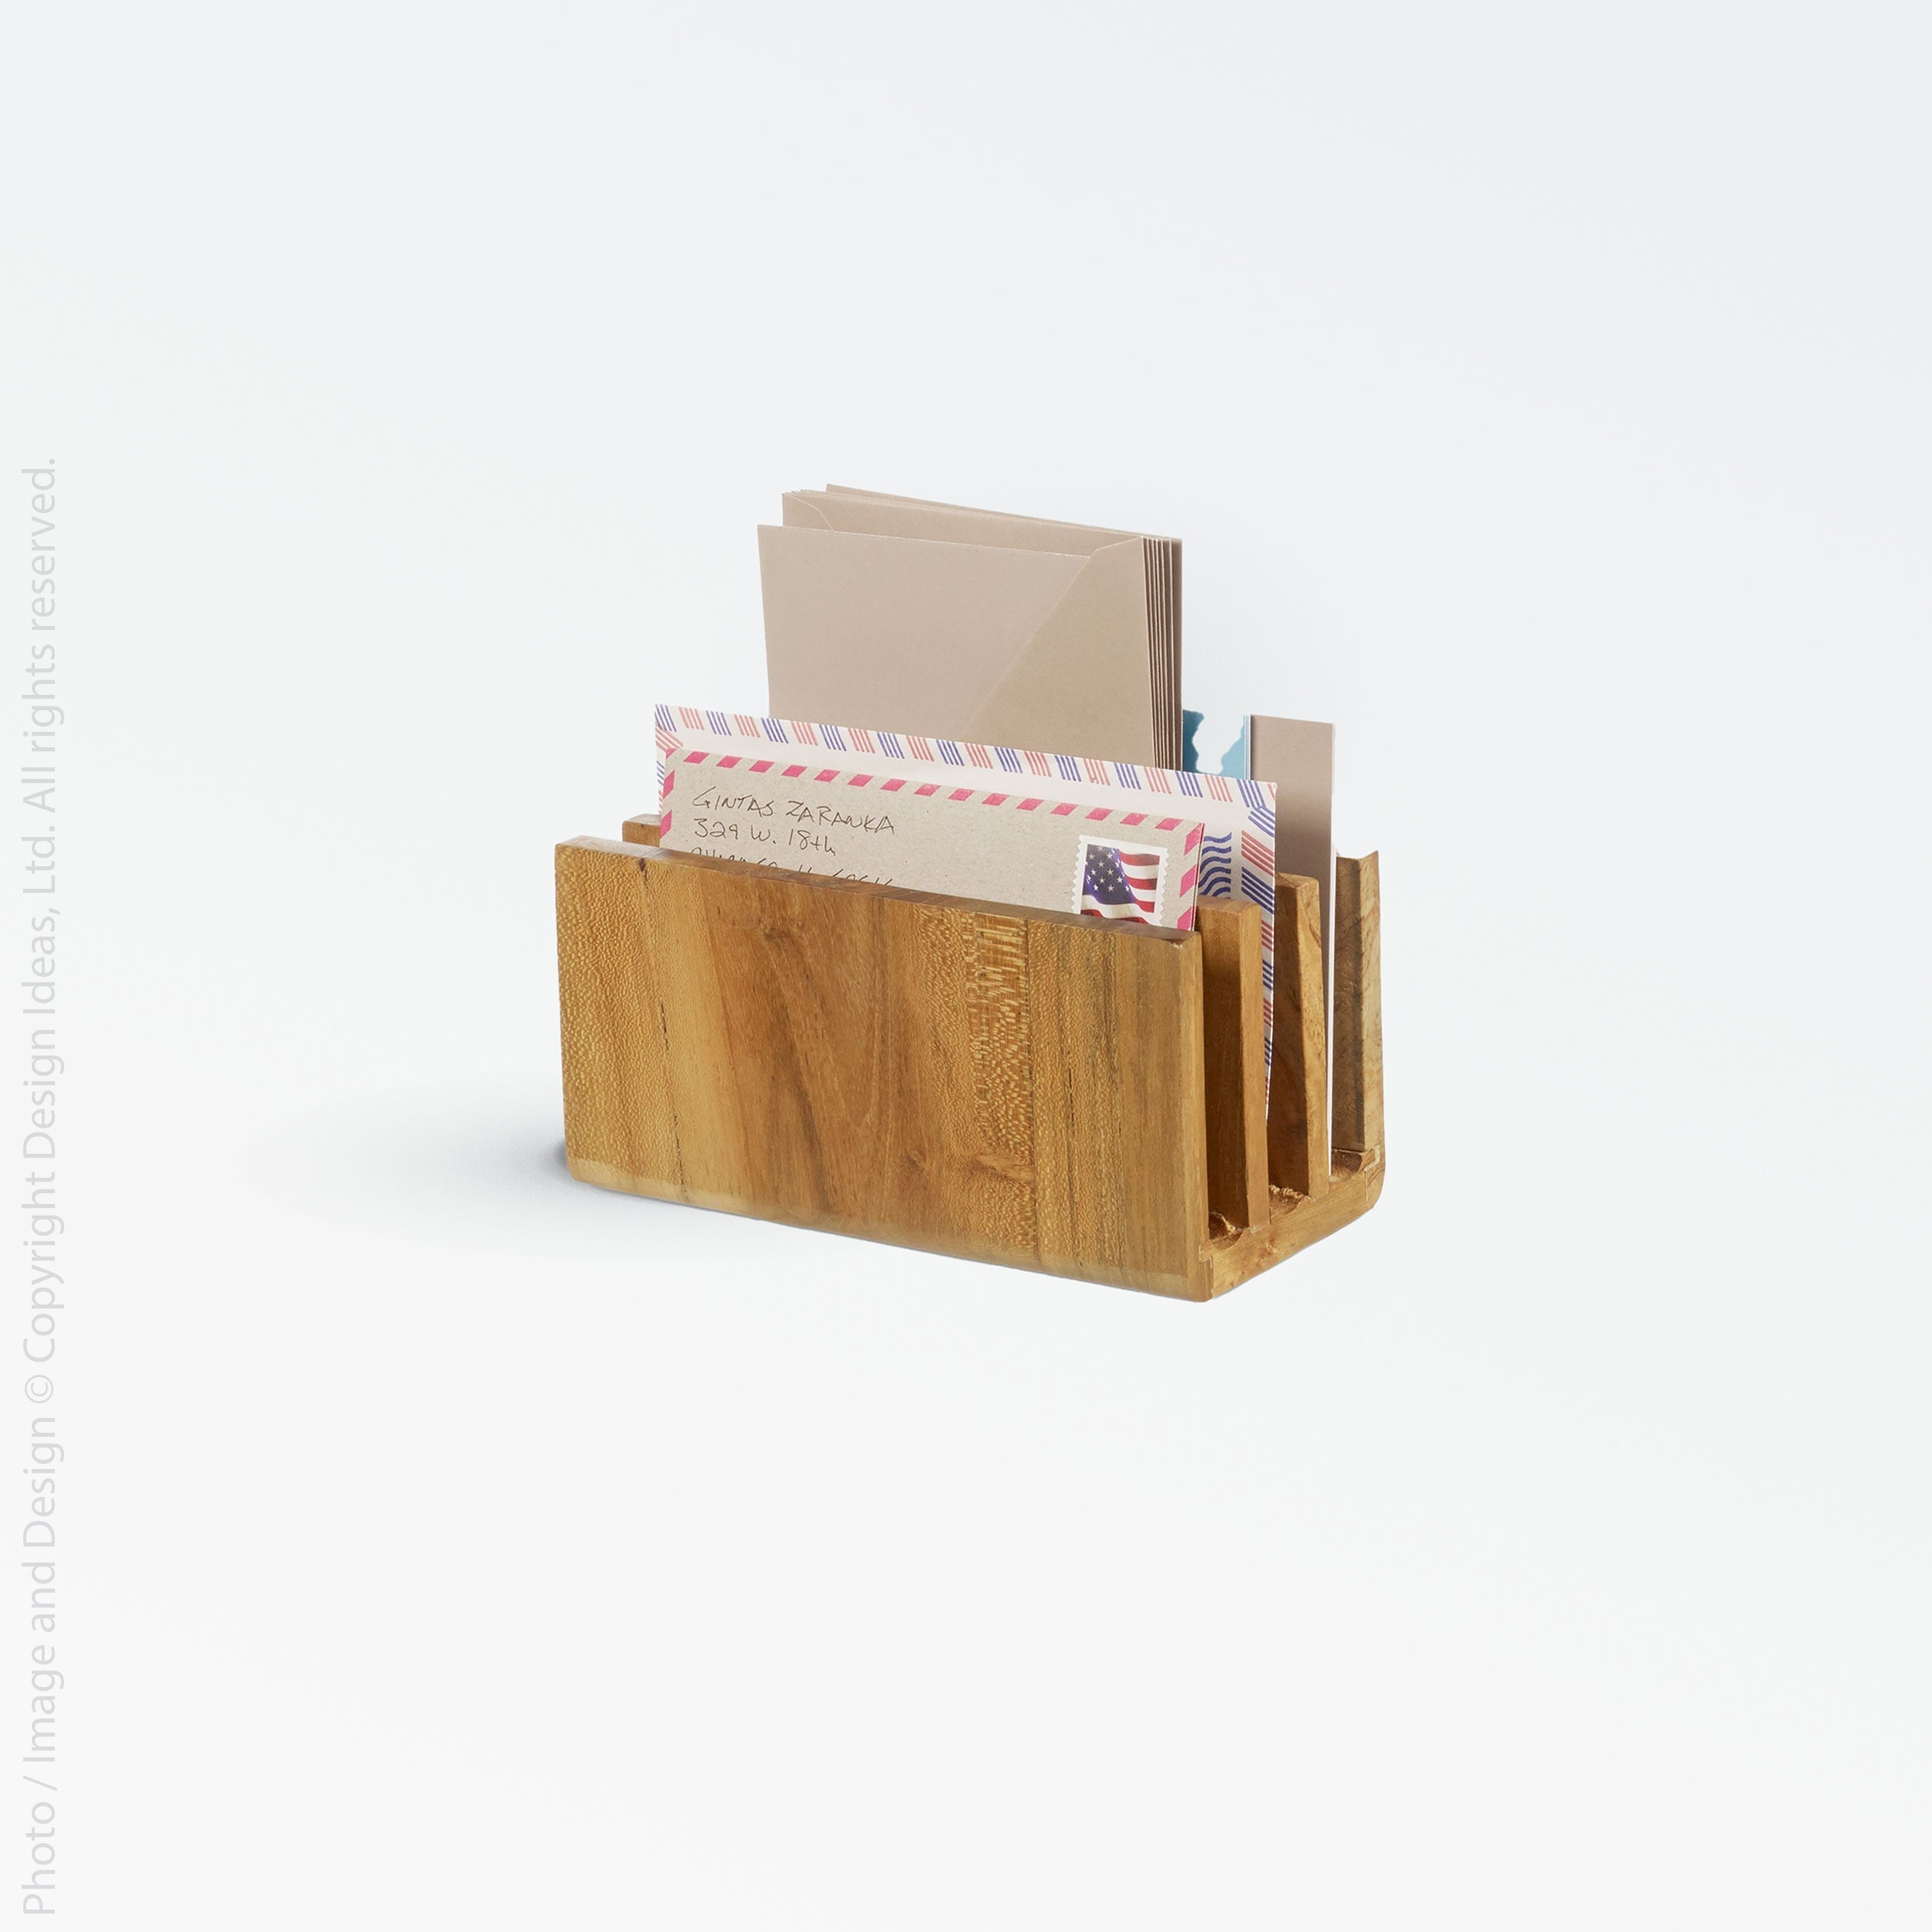 Takara Teak Letter Sorter - Natural Color | Image 1 | From the Takara Collection | Masterfully constructed with solid teak for long lasting use | This organizer is sustainably sourced | Available in clear color | texxture home